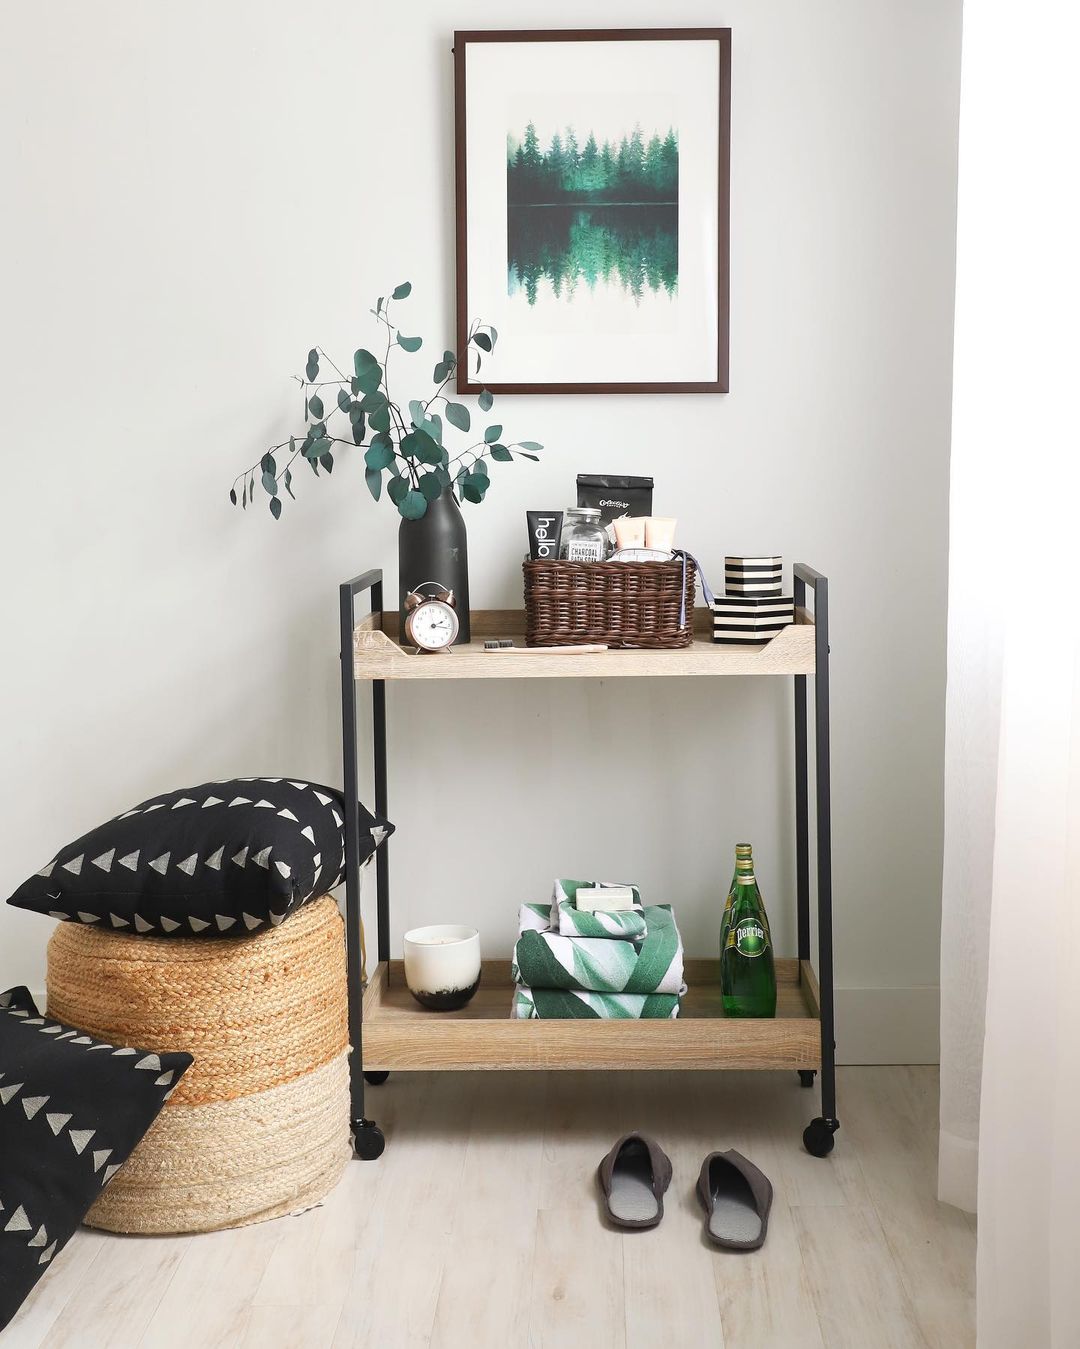 A wooden and metal cart on wheels and a storage basket provide clever storage options for a more efficient use of space.